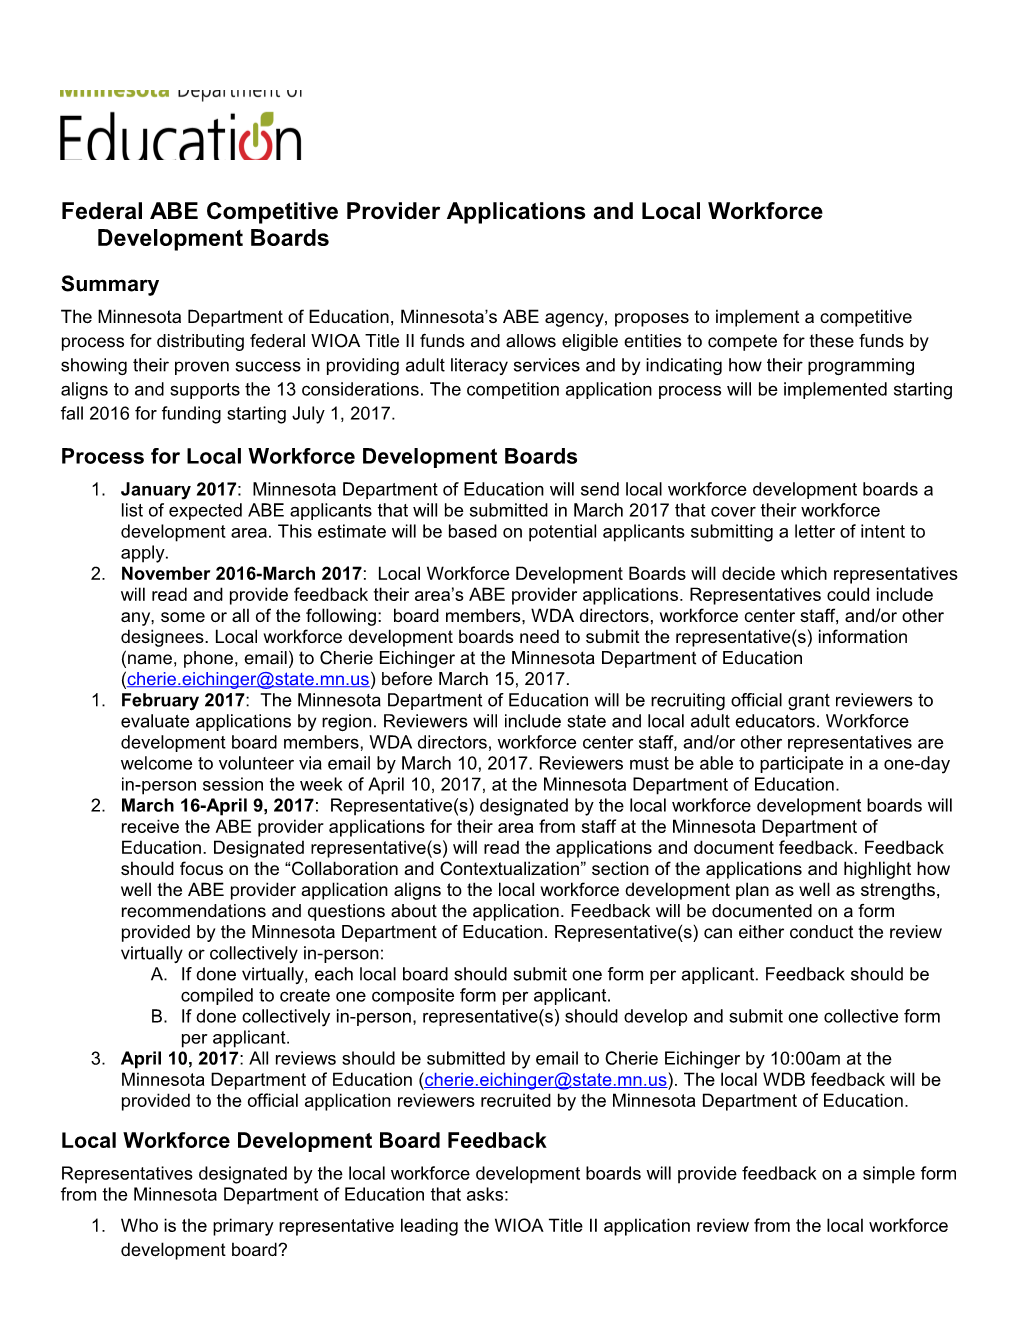 Federal ABE Competitive Provider Applications and Local Workforce Development Boards